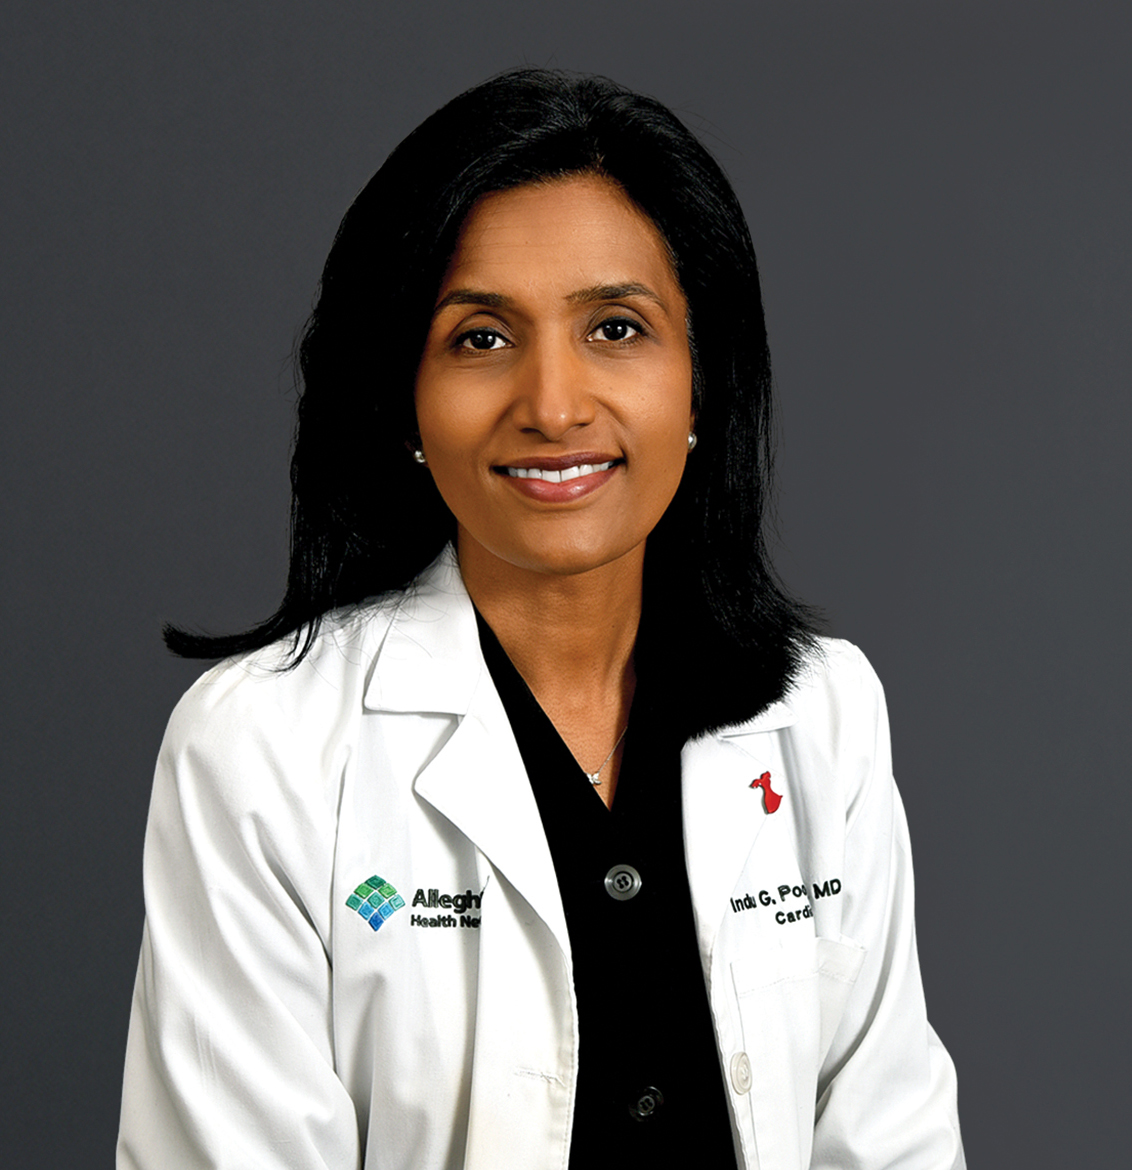 Dr. Indu Poornima, cardiologist and director of the Allegheny Health Network (AHN) Women’s Heart Center.